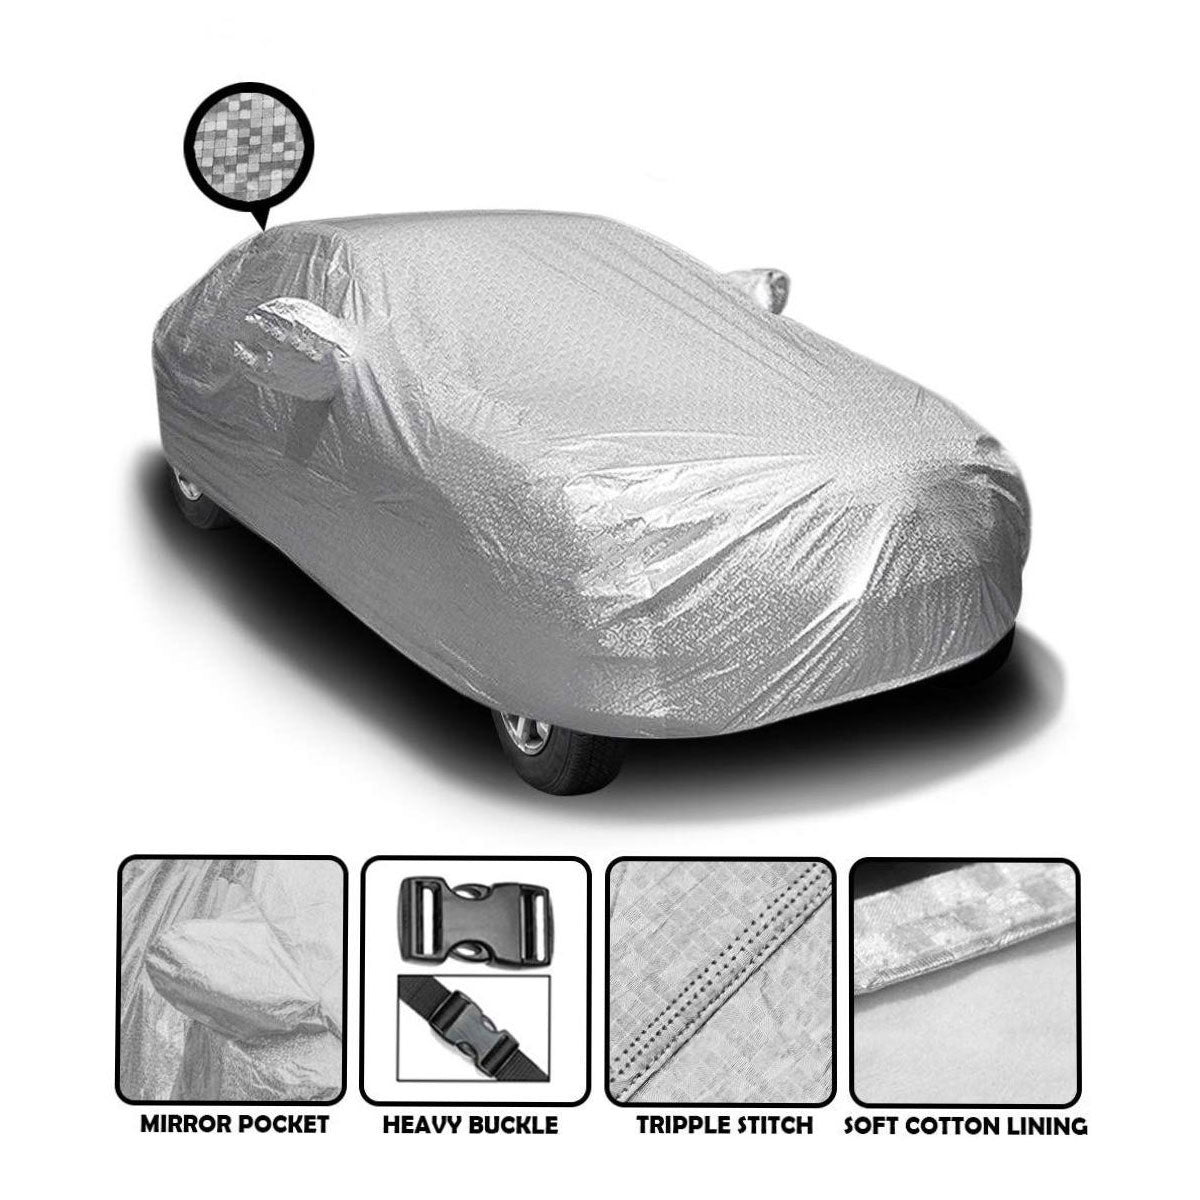 Oshotto Spyro Silver Anti Reflective, dustproof and Water Proof Car Body Cover with Mirror Pockets For Renault Scala/Fluence